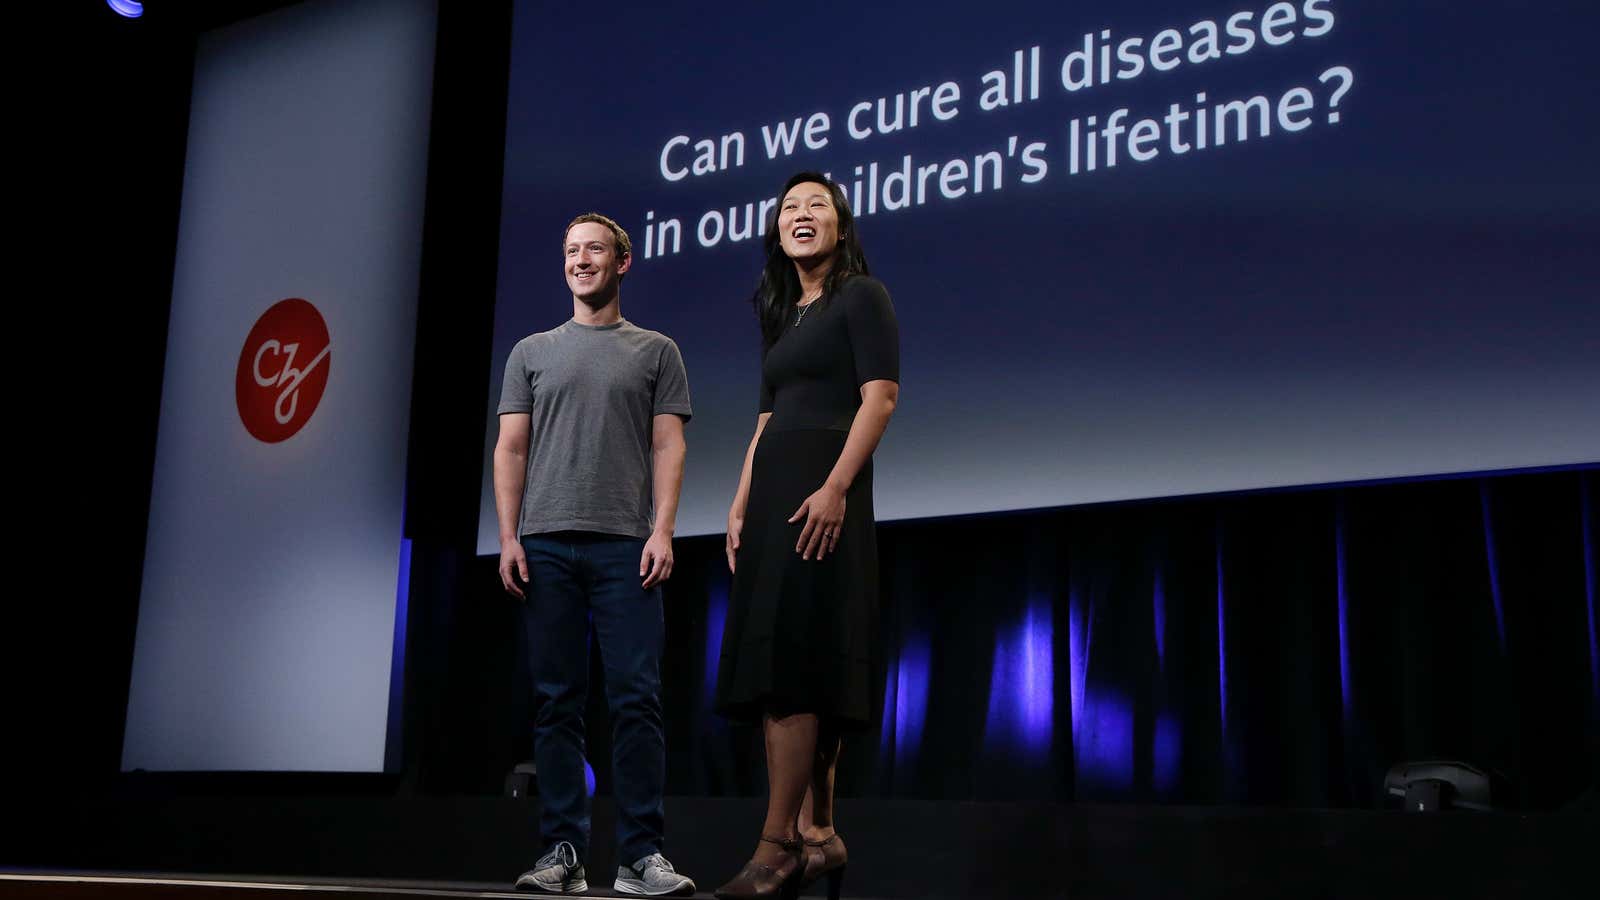 “Can we cure all diseases in our children’s lifetime?”